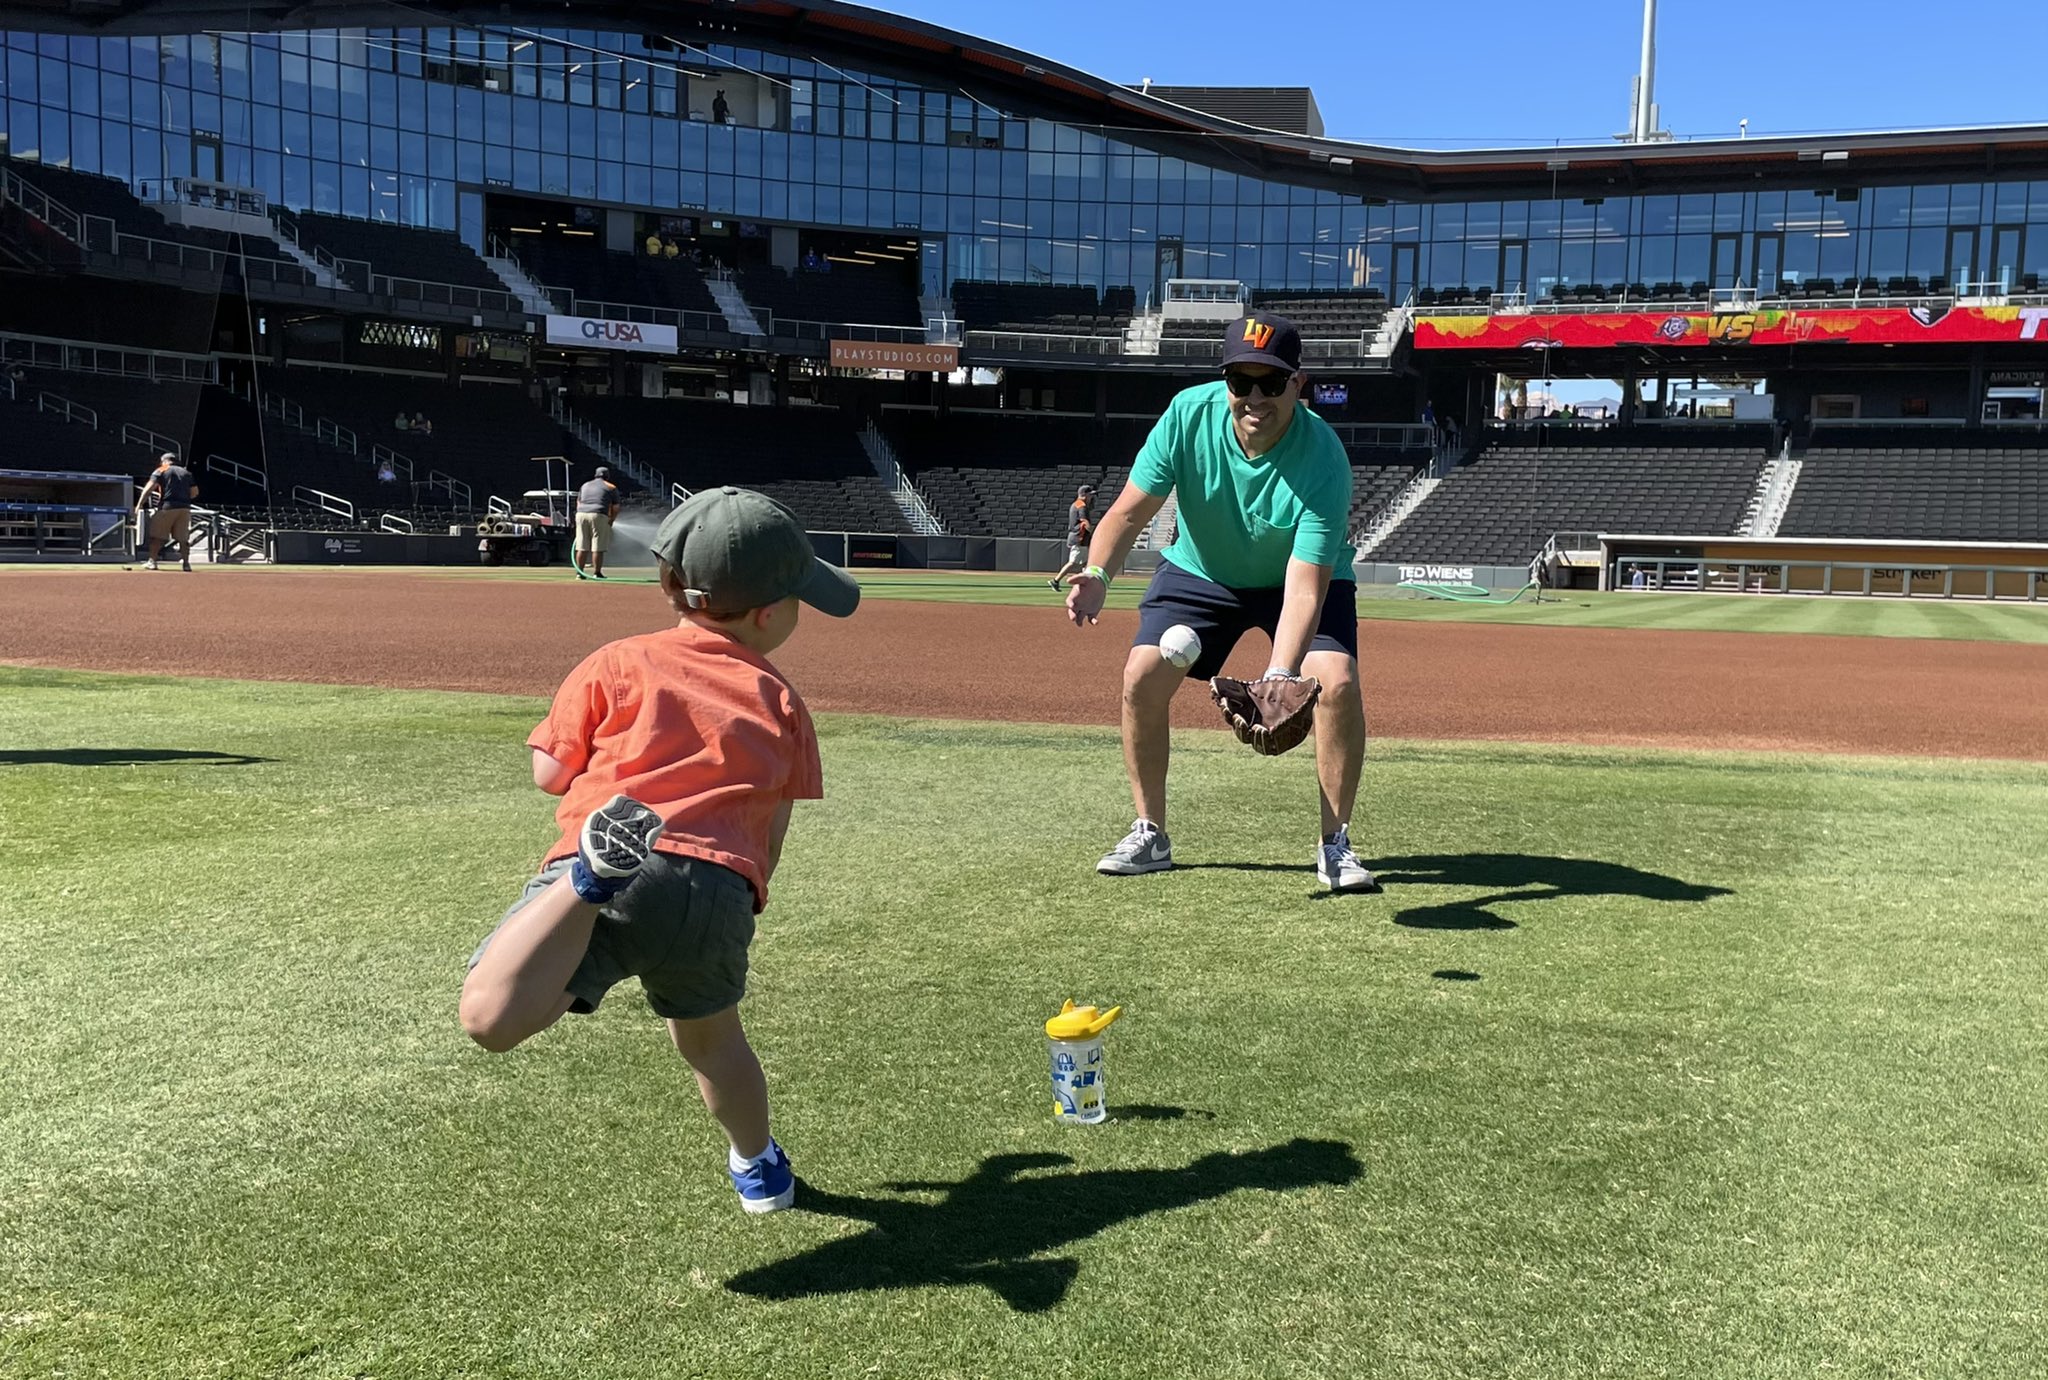 Celebrating Father's Day with a catch, Aviators/Baseball